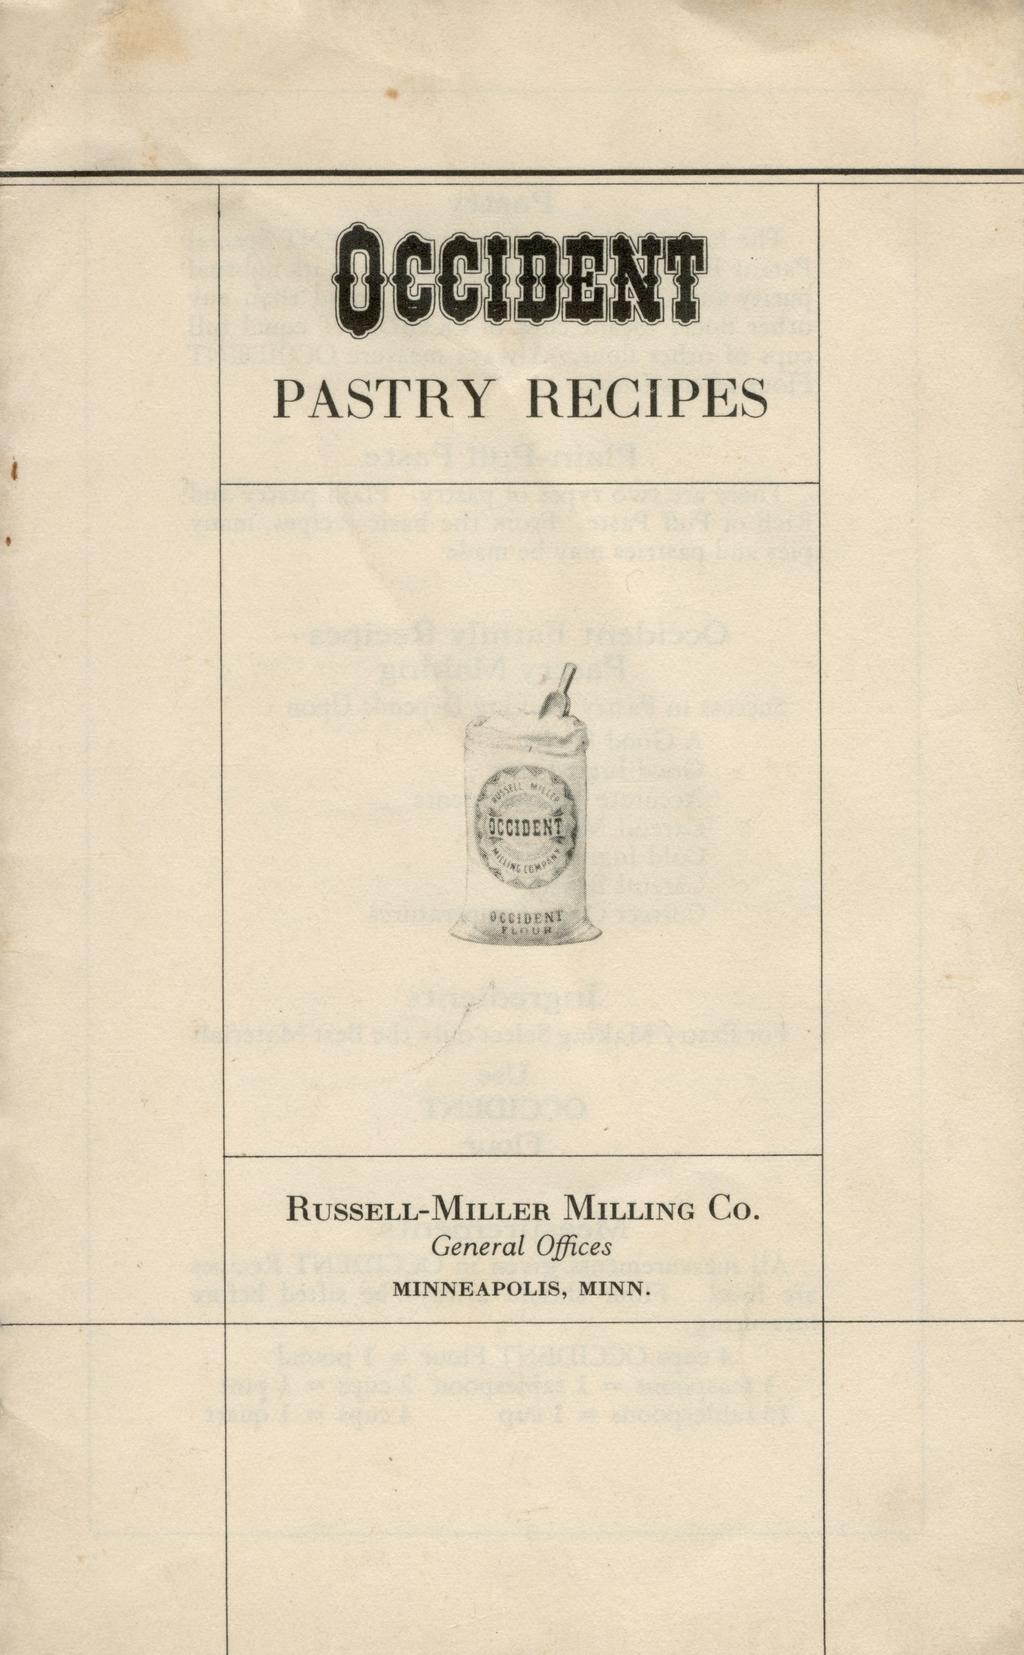 PASTRY RECIPES RUSSELL-MILLER MILLING